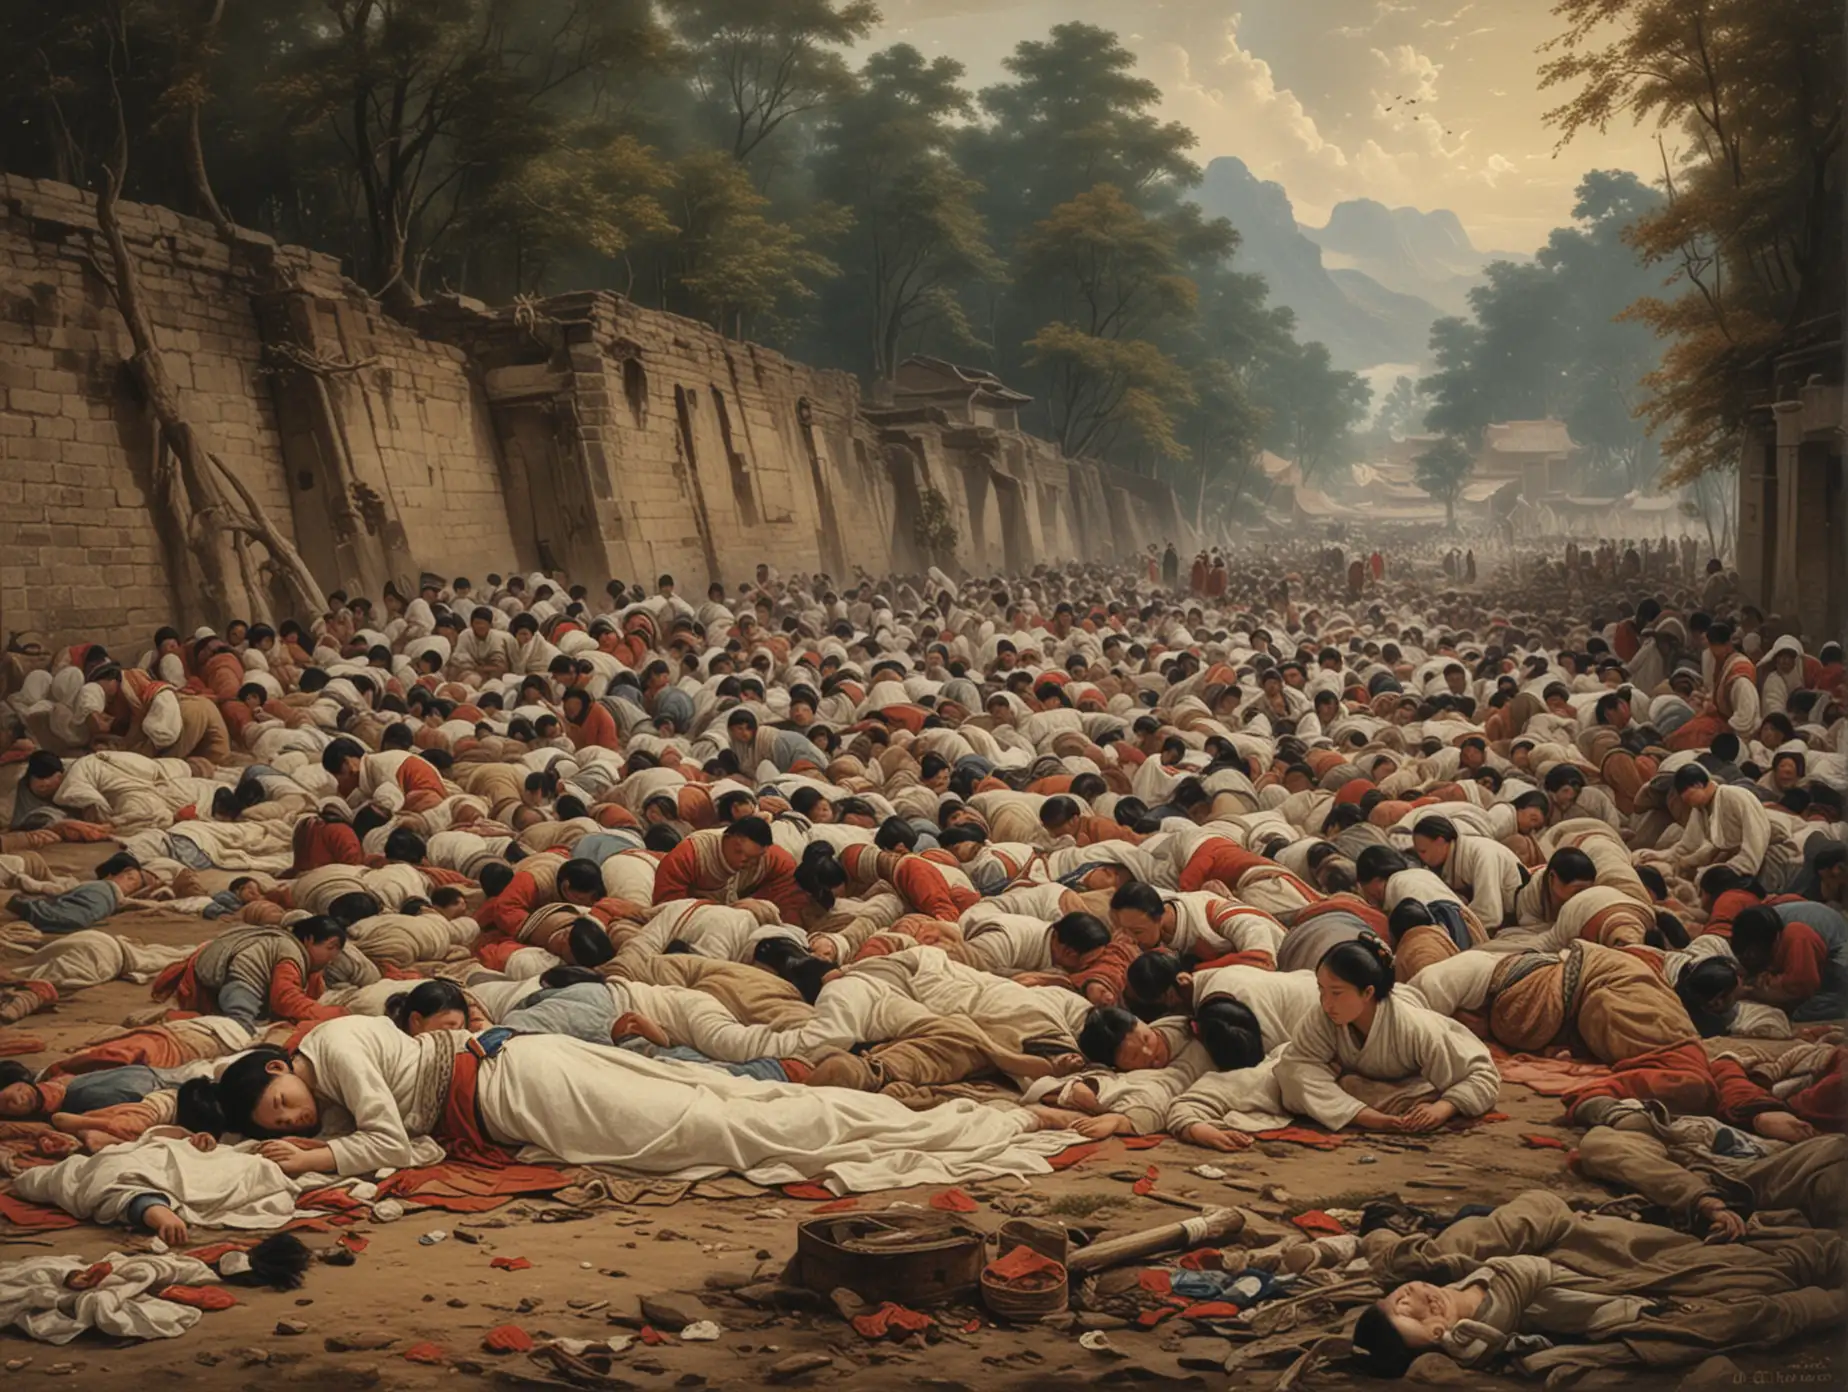 Taiping Heavenly Kingdom. 1862. Anqing. City falls. Massacre. Women. On the ground. Holding infant. Ruptured abdomen.